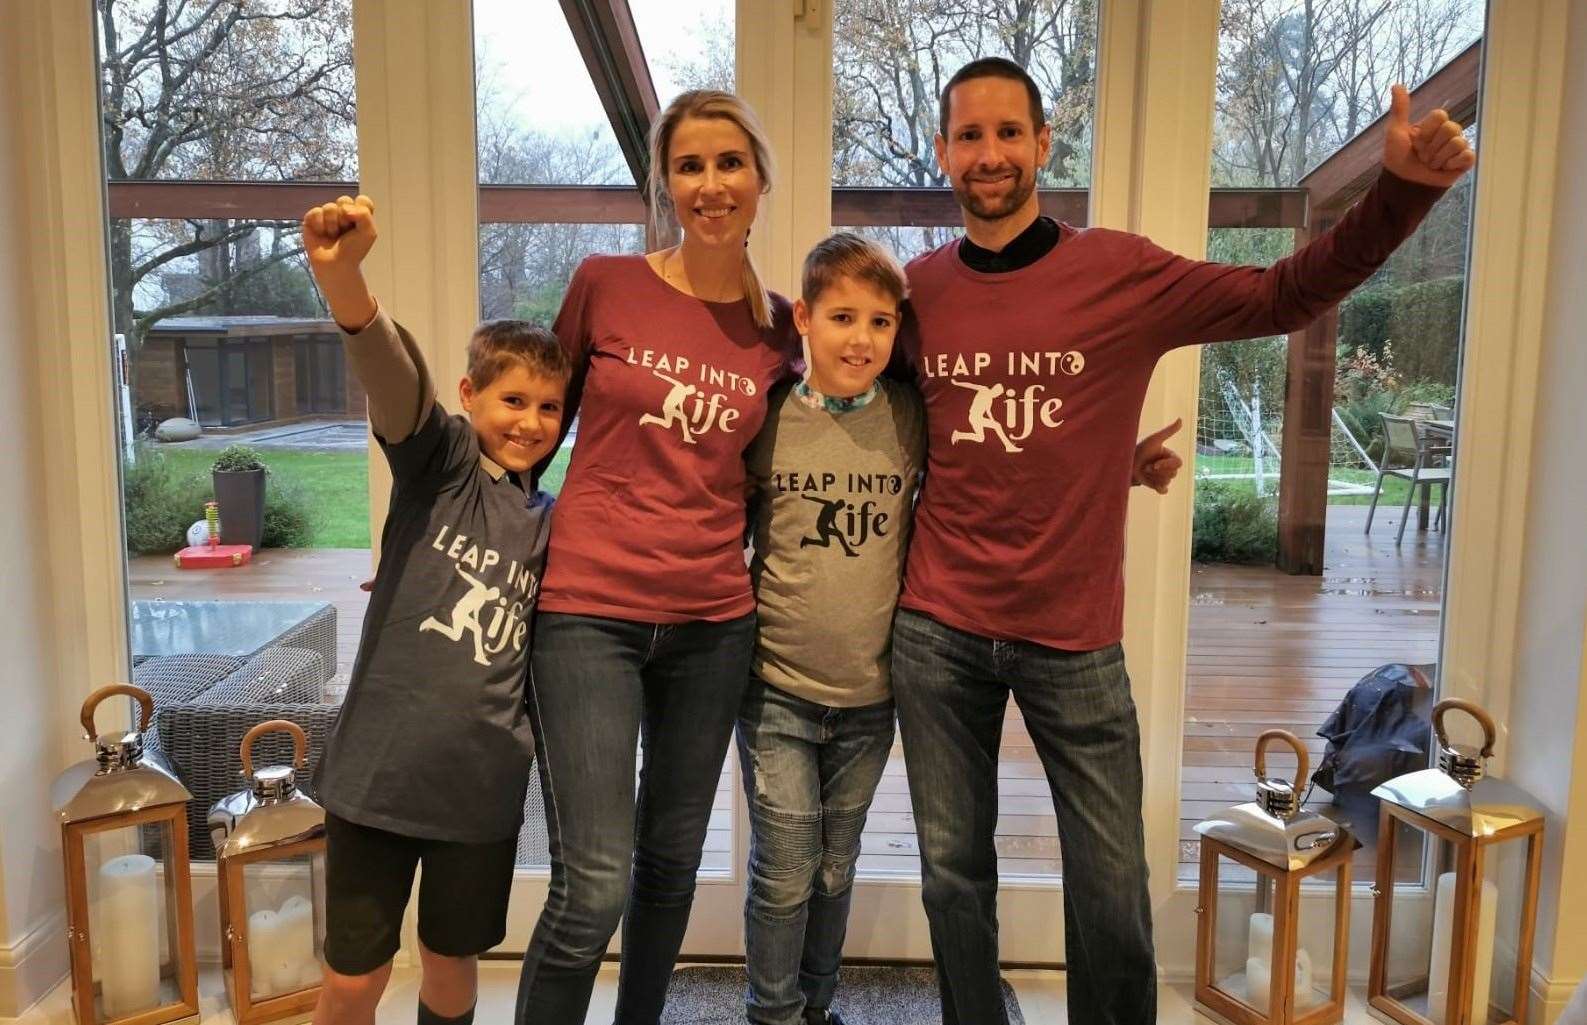 Johan, Francisca, Kasten and Stirling in their Leap Into Life t-shirts